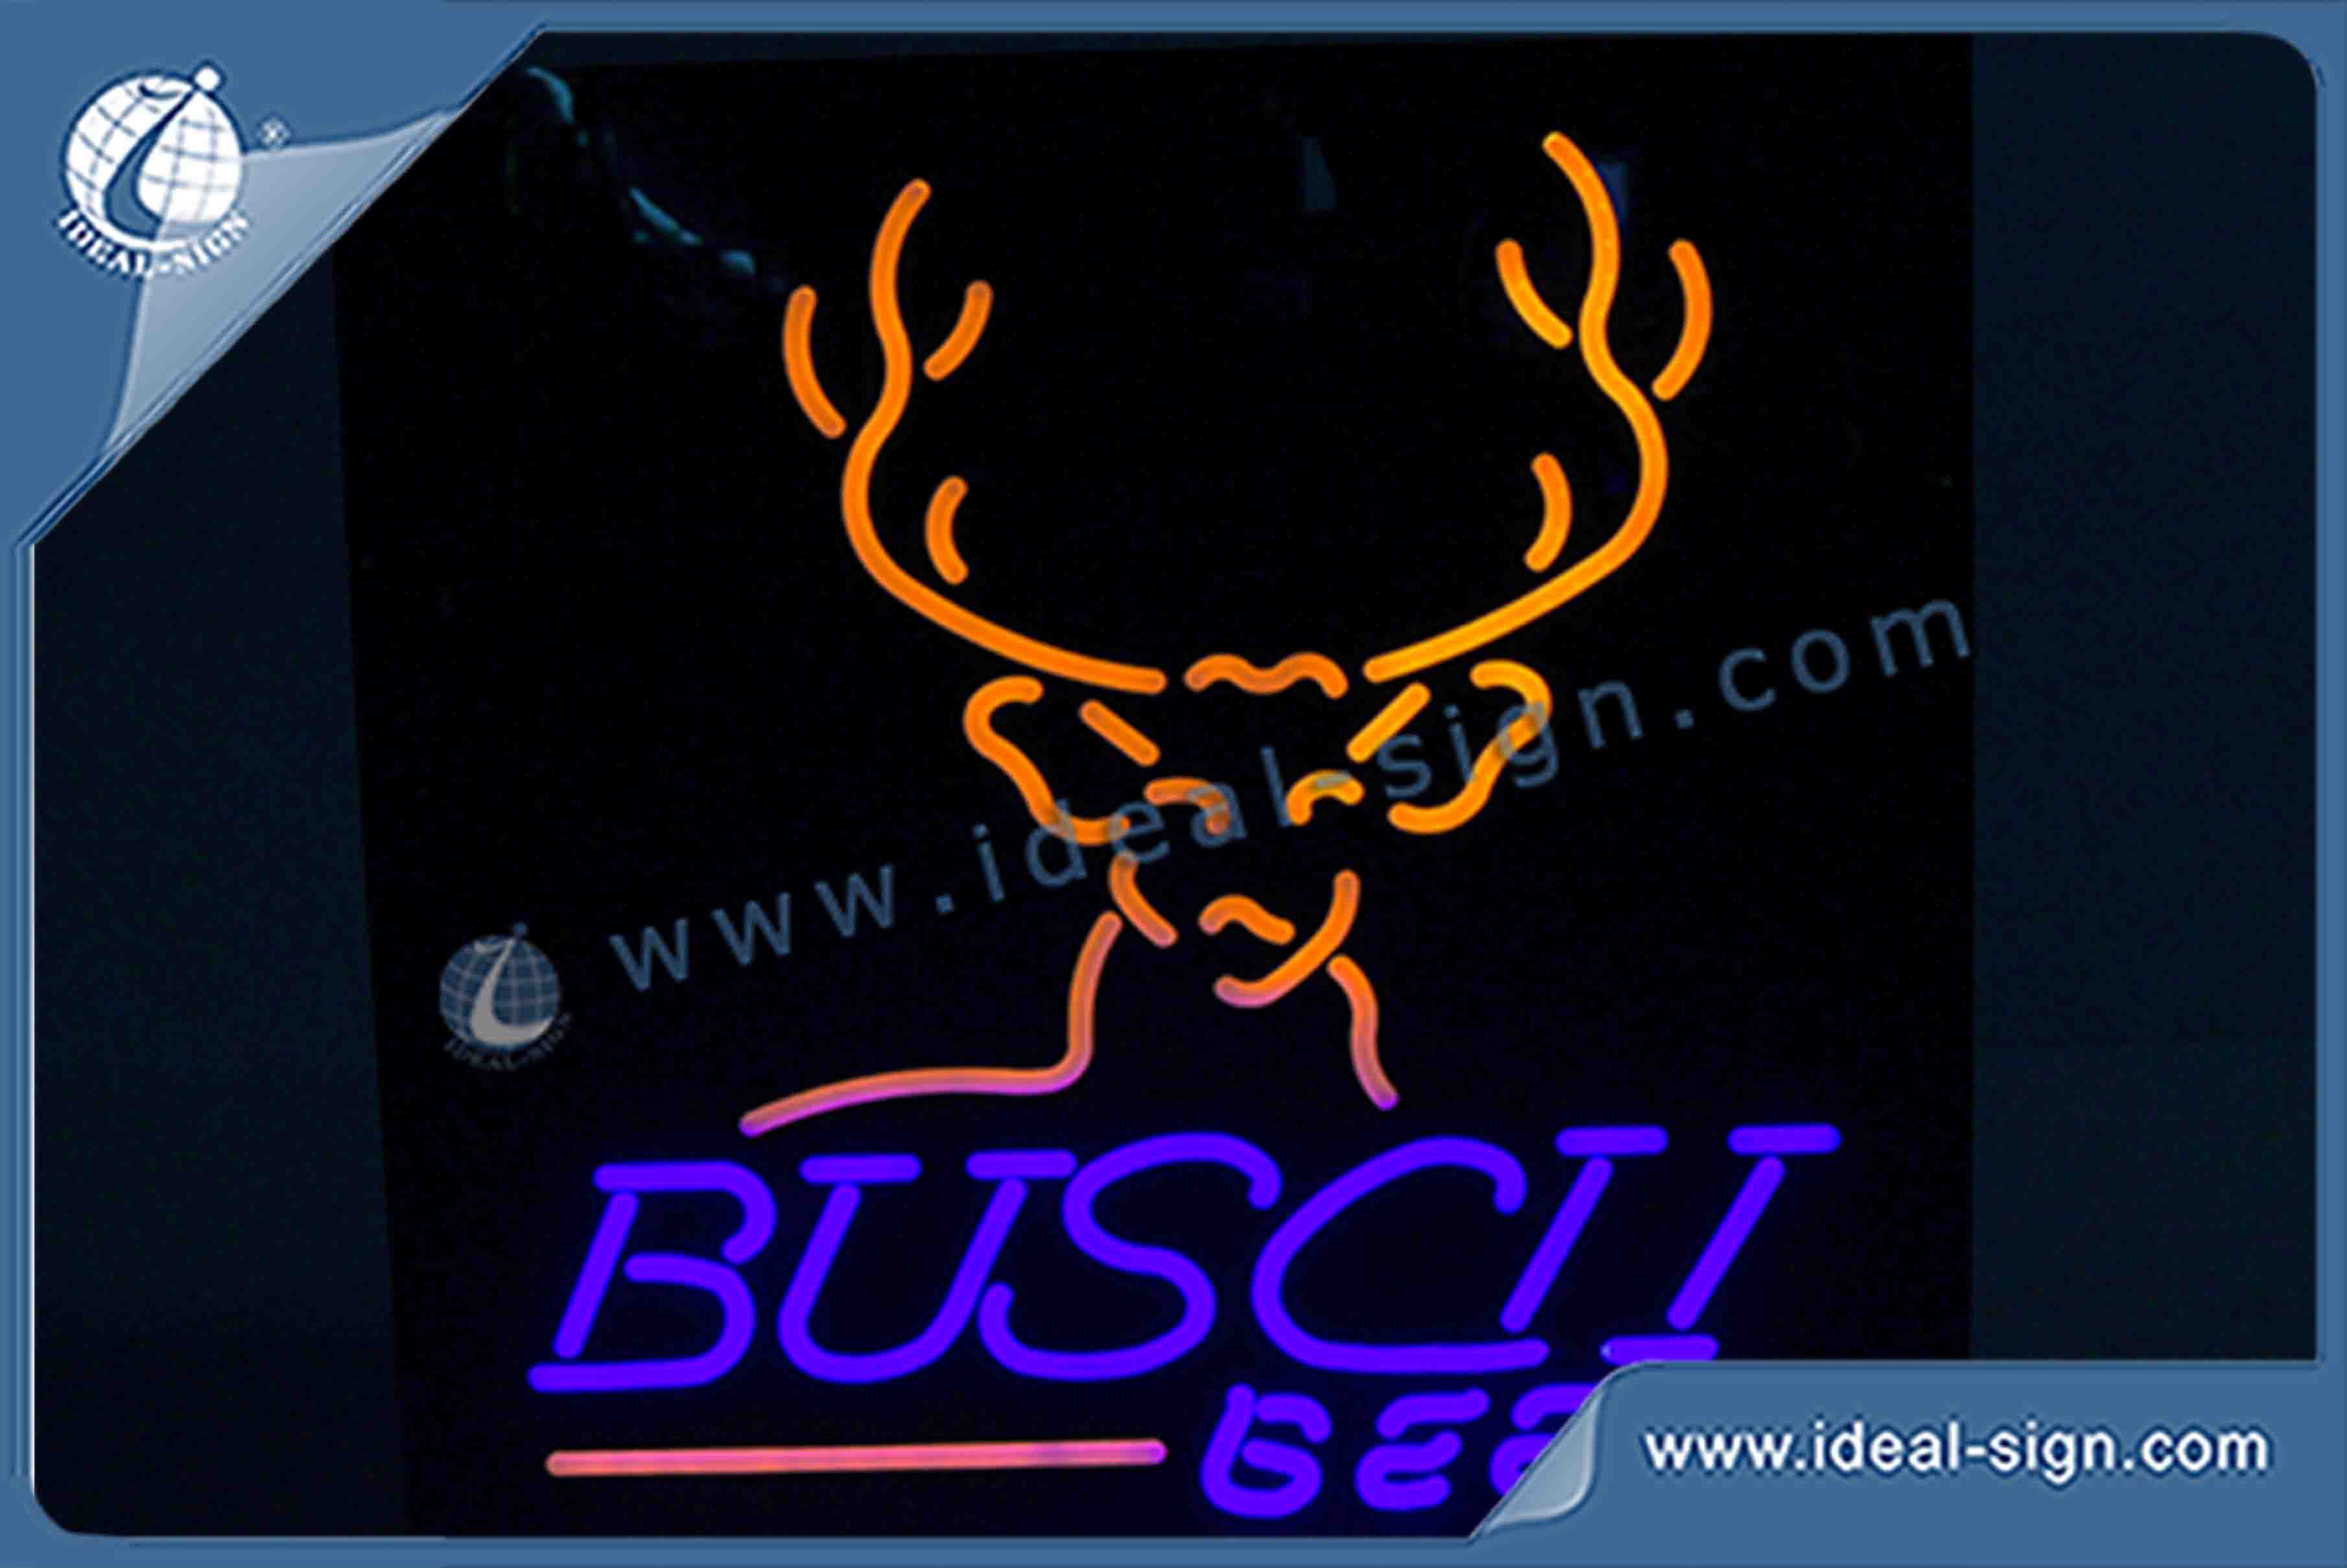 custom outdoor neon signs
custom neon signs for sale
custom neon signs
custom neon bar signs
custom made neon signs
neon open sign for sale
neon open sign
neon sign custom
neon advertising signs
led neon signs wholesale